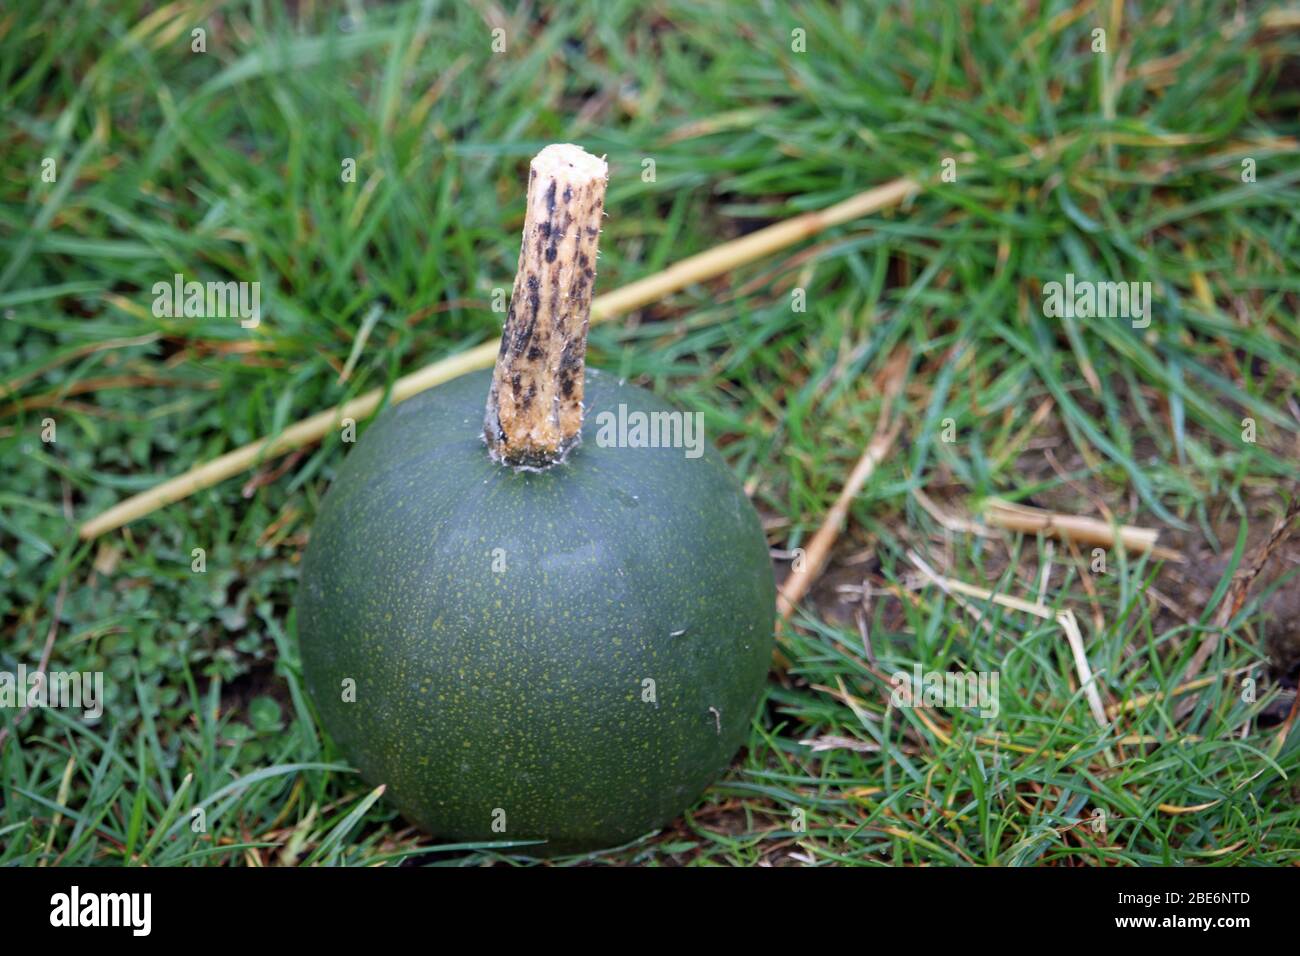 Little gem rolet squash variety of Cucurbita pepo, with grass in the background. Stock Photo